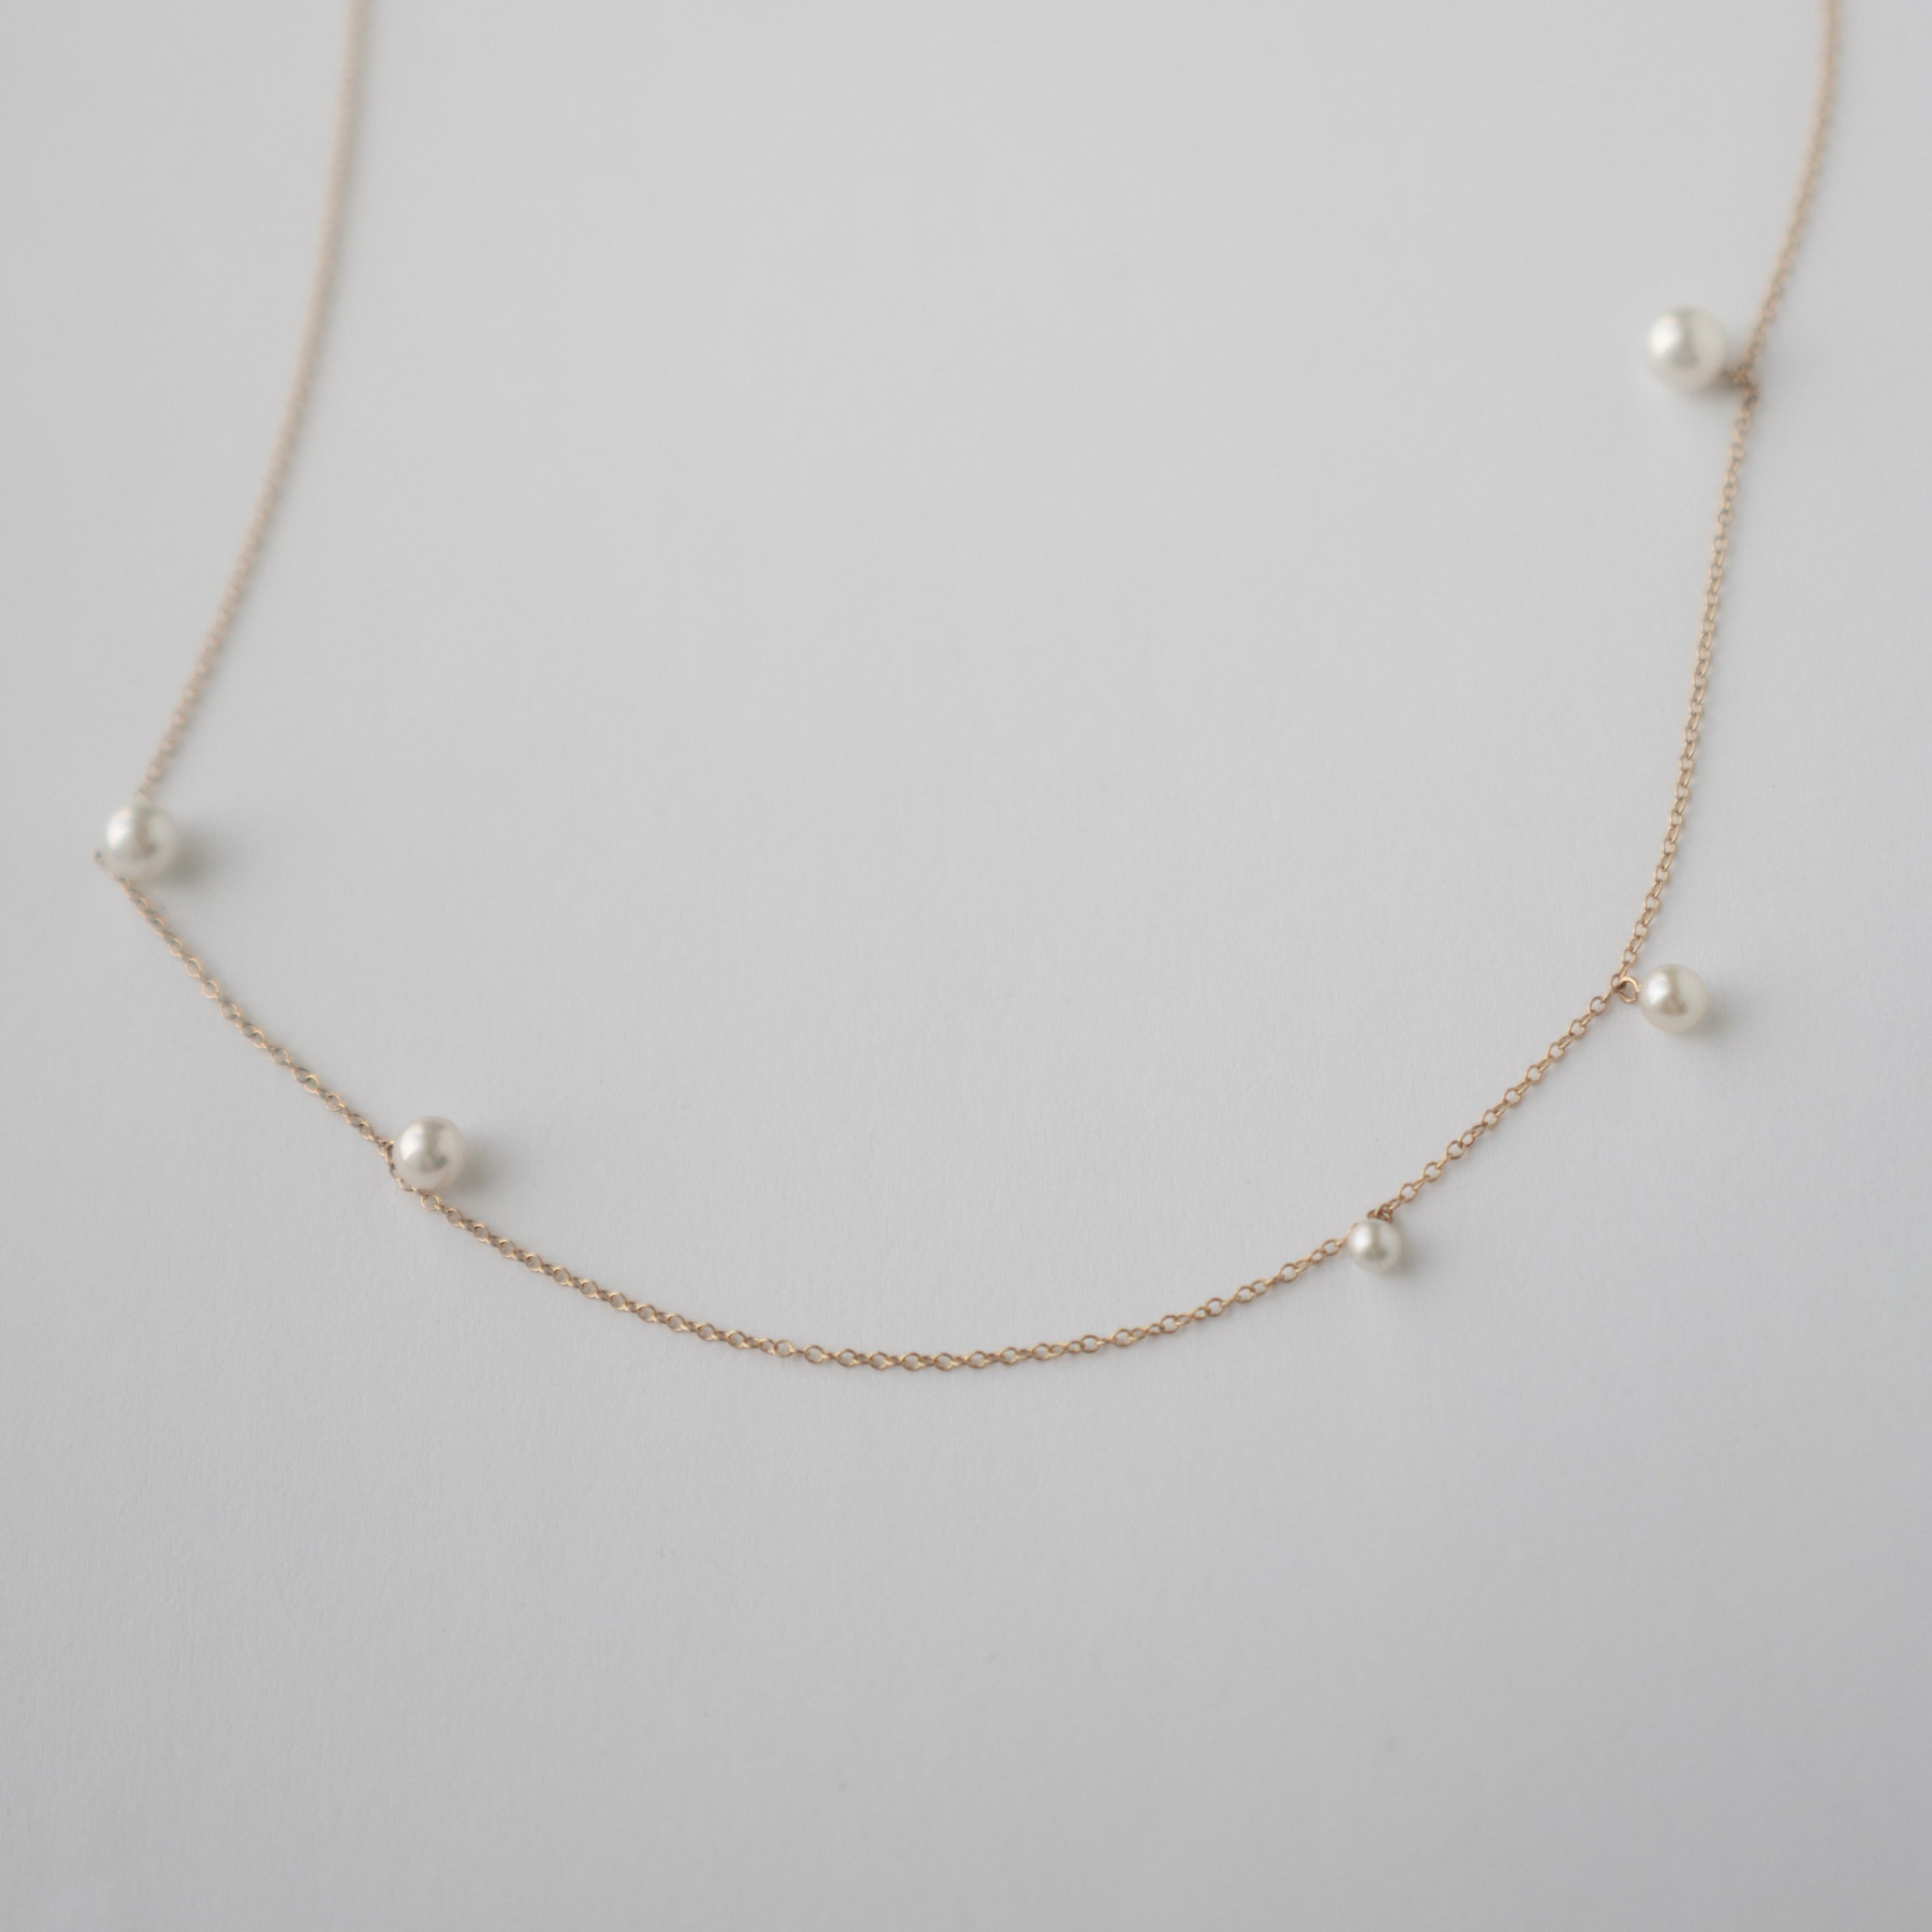 Designer RIti choker in 14k yellow gold with pearls made in New York City by SHW fine Jewelry